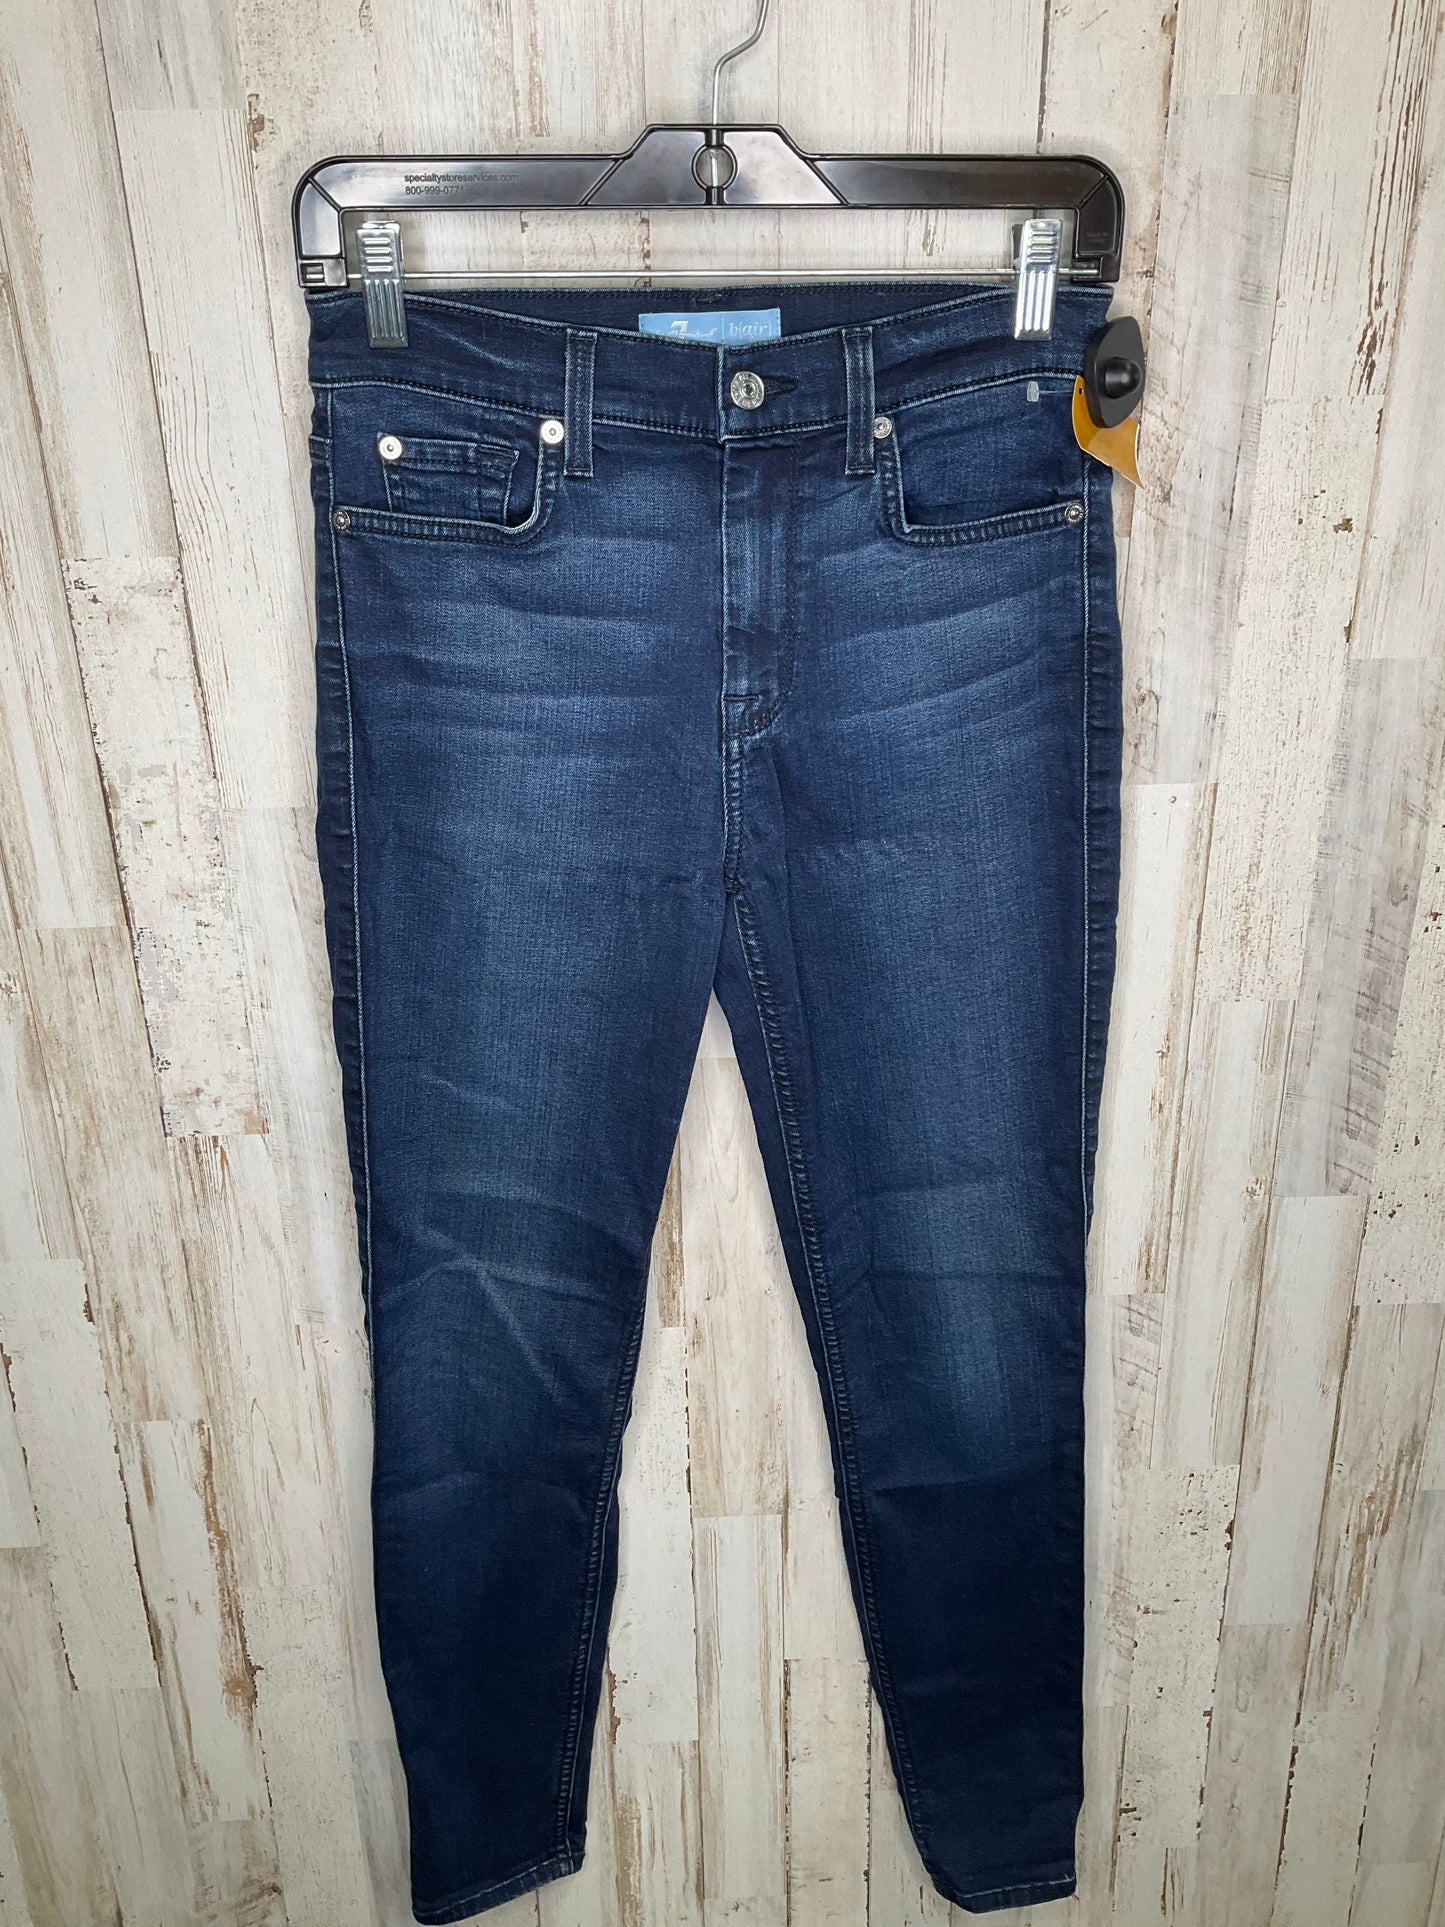 Jeans Skinny By 7 For All Mankind  Size: 4